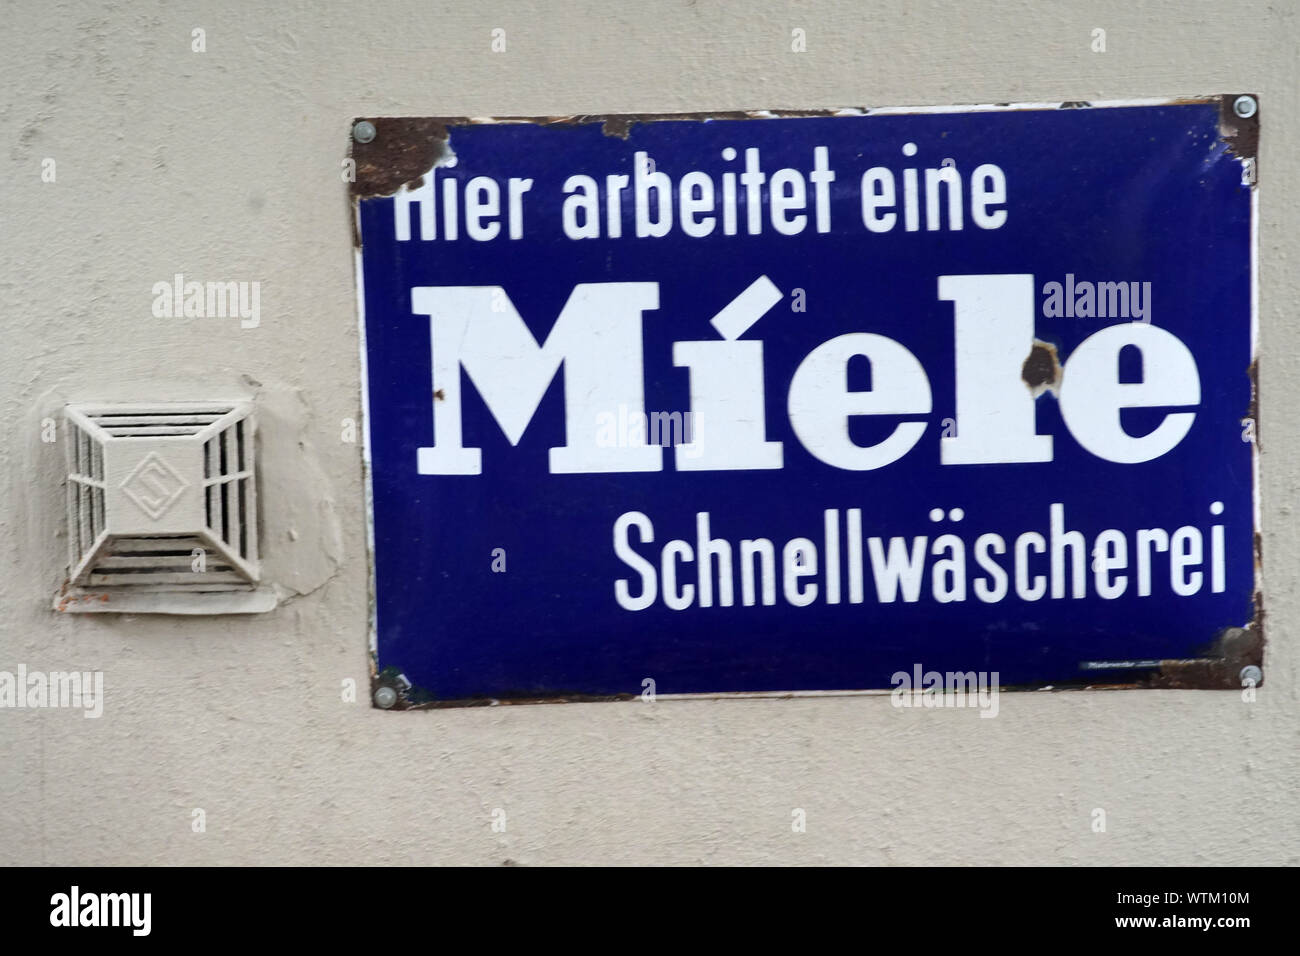 Bad Vilbel, Germany - September 08, 2019: The rusted vintage sign of a laundry with a Miele logo on September 08, 2019 in Bad Vilbel. Stock Photo